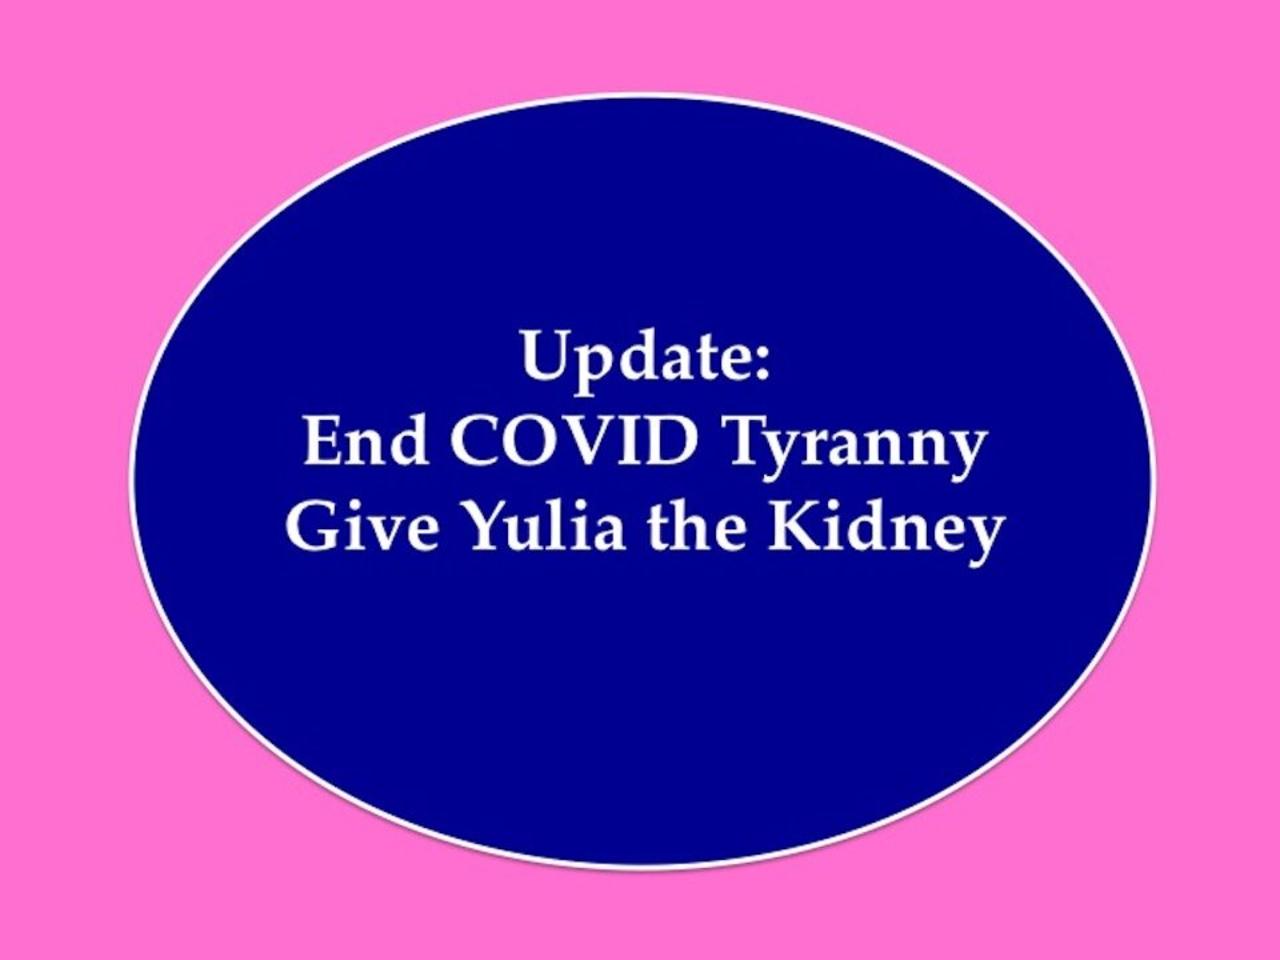 Update End COVID Tyranny Give Yulia the Kidney